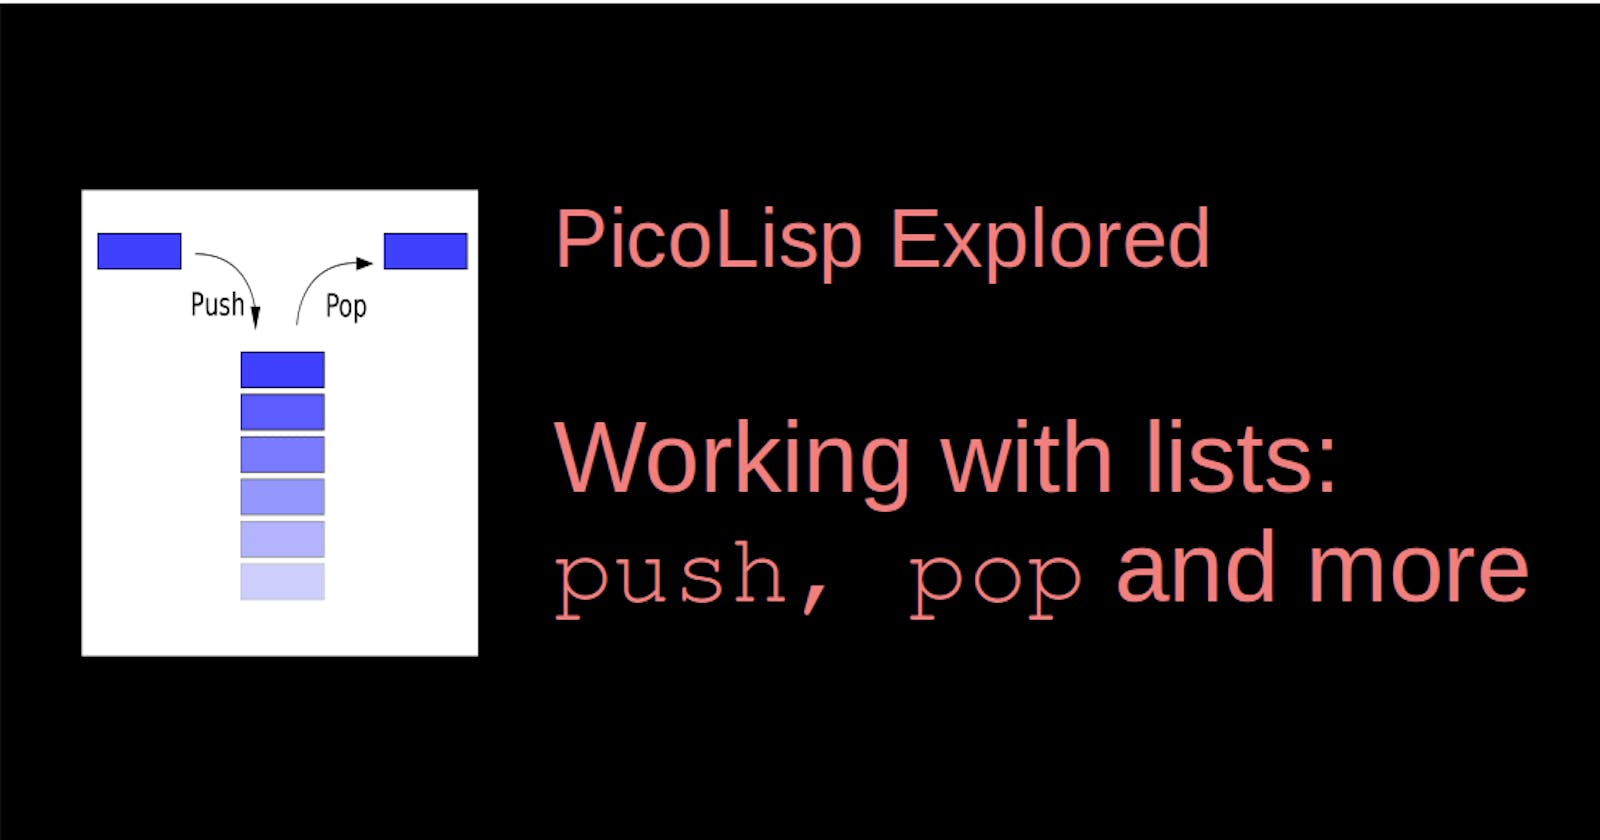 Working with Lists - push, pop, and more.